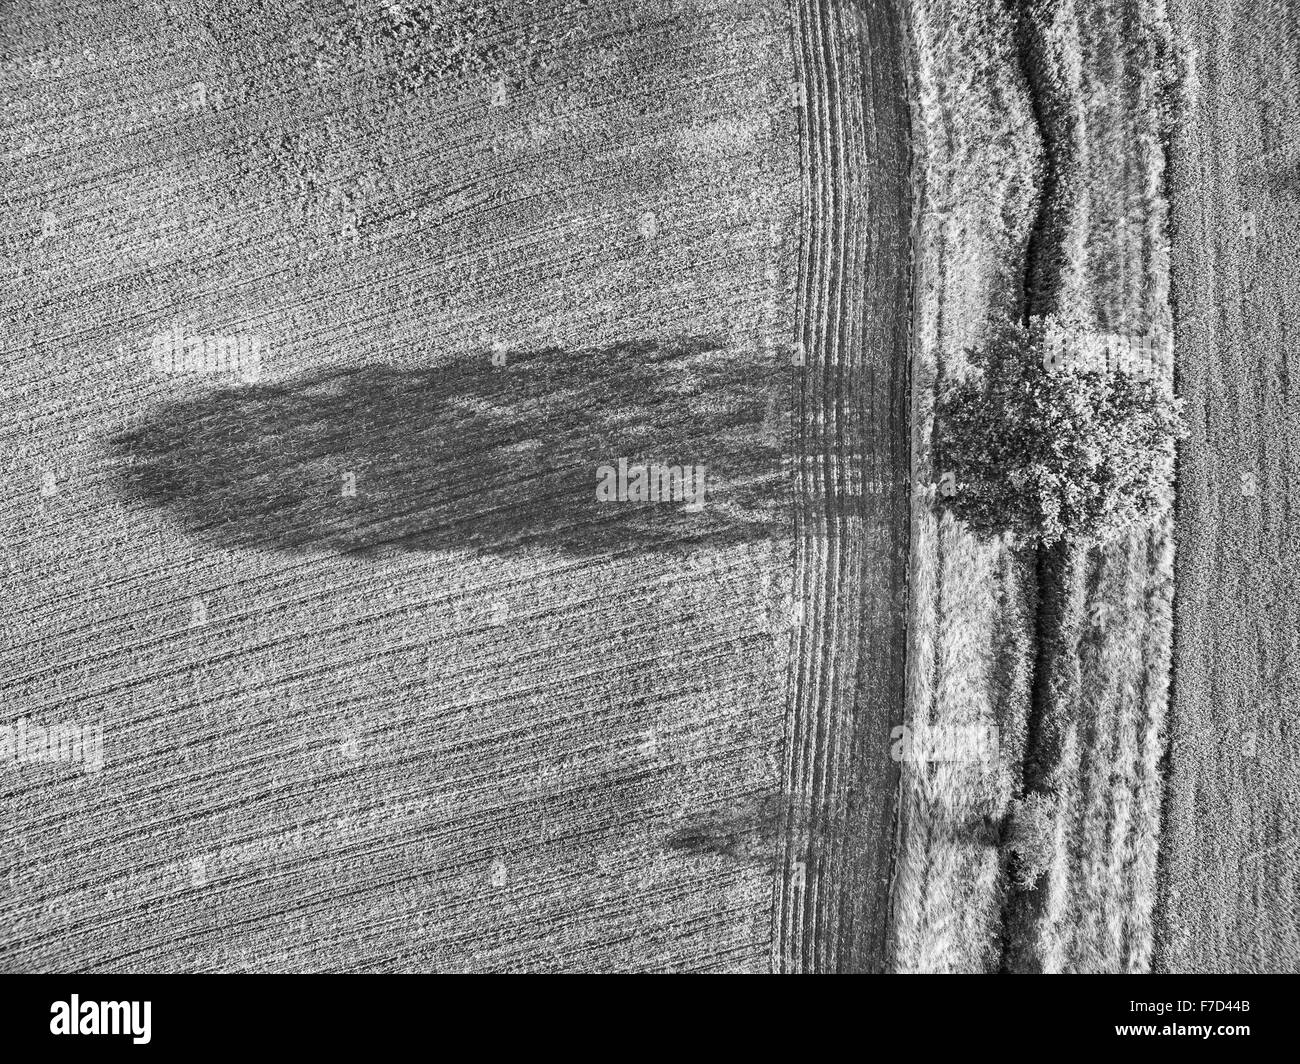 Aerial view looking down vertically onto tree and farmland with dramatic parallel lines and shadows Stock Photo